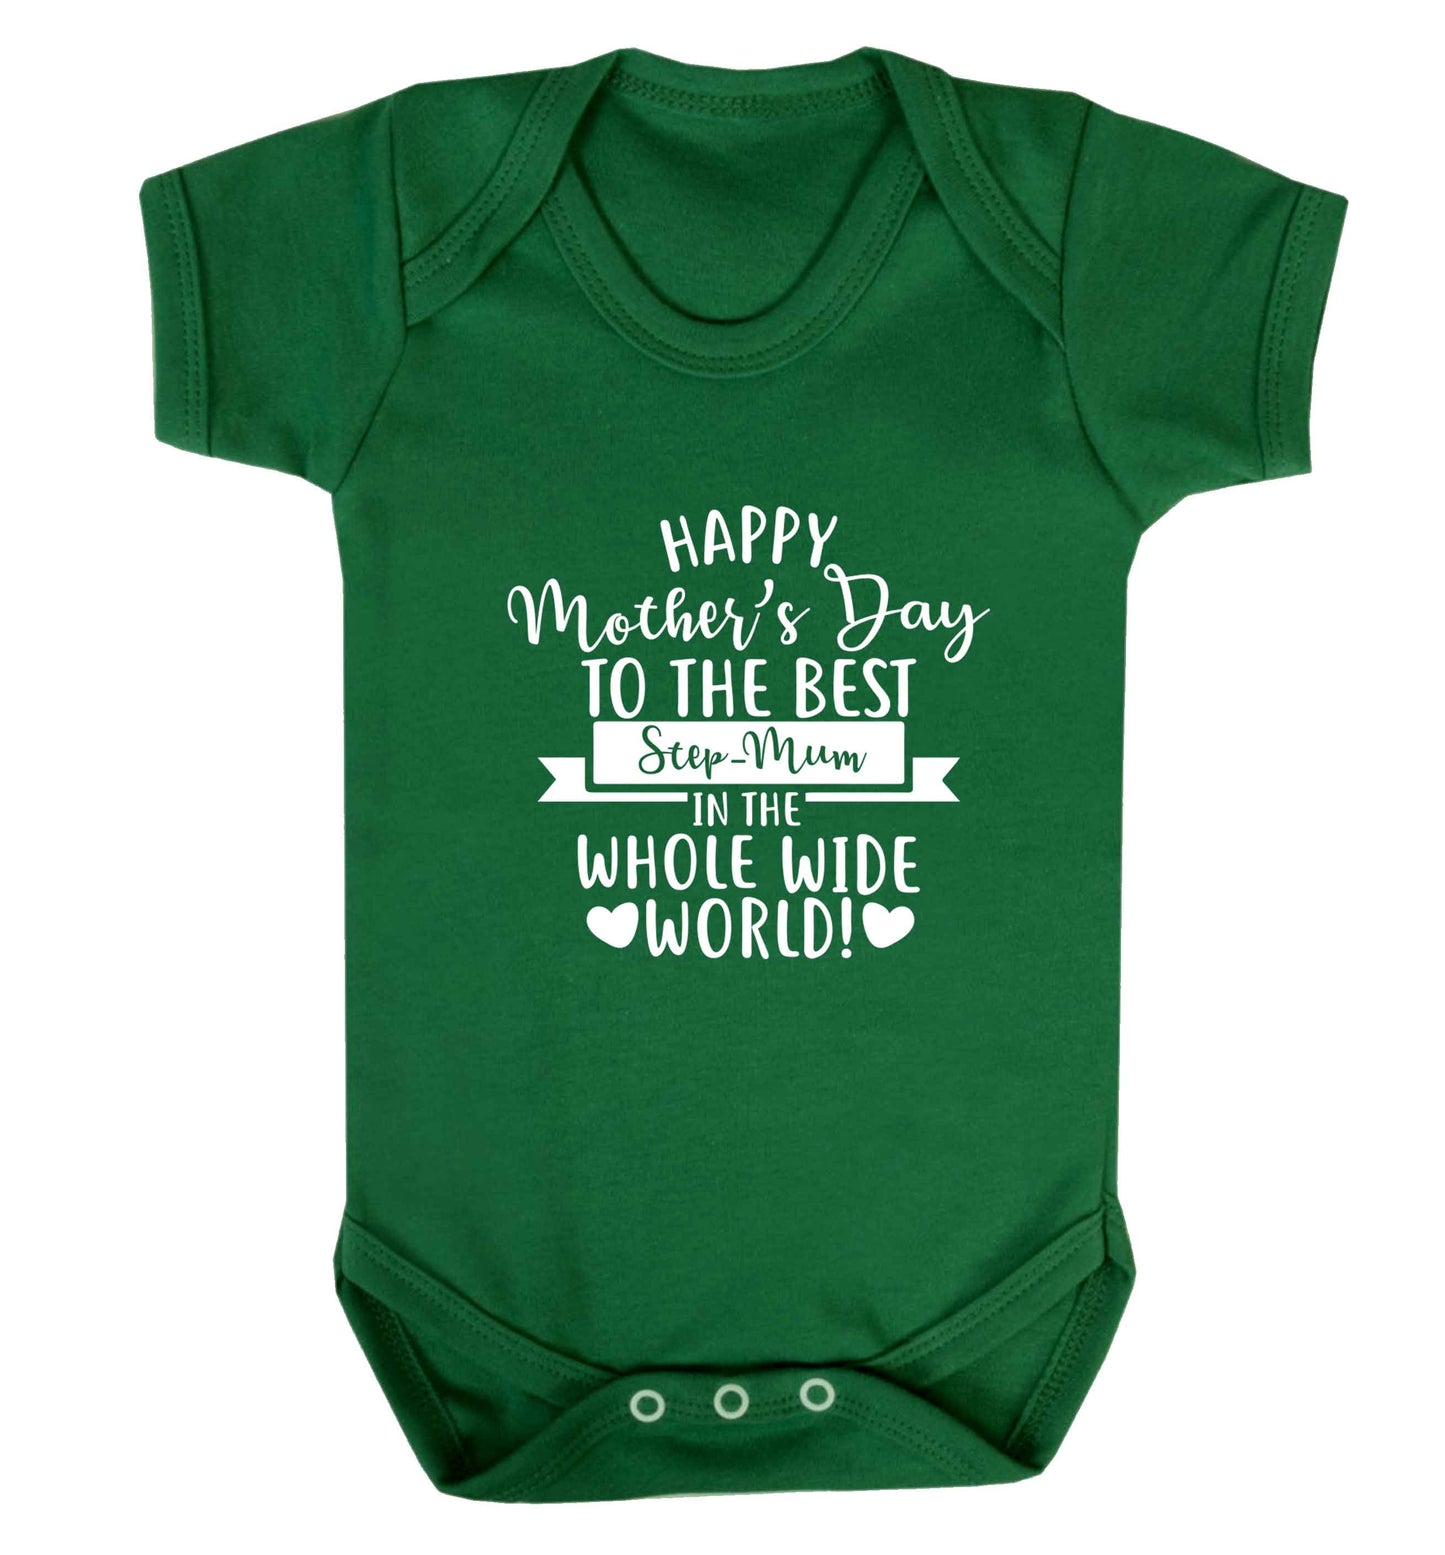 Happy mother's day to the best step-mum in the world baby vest green 18-24 months